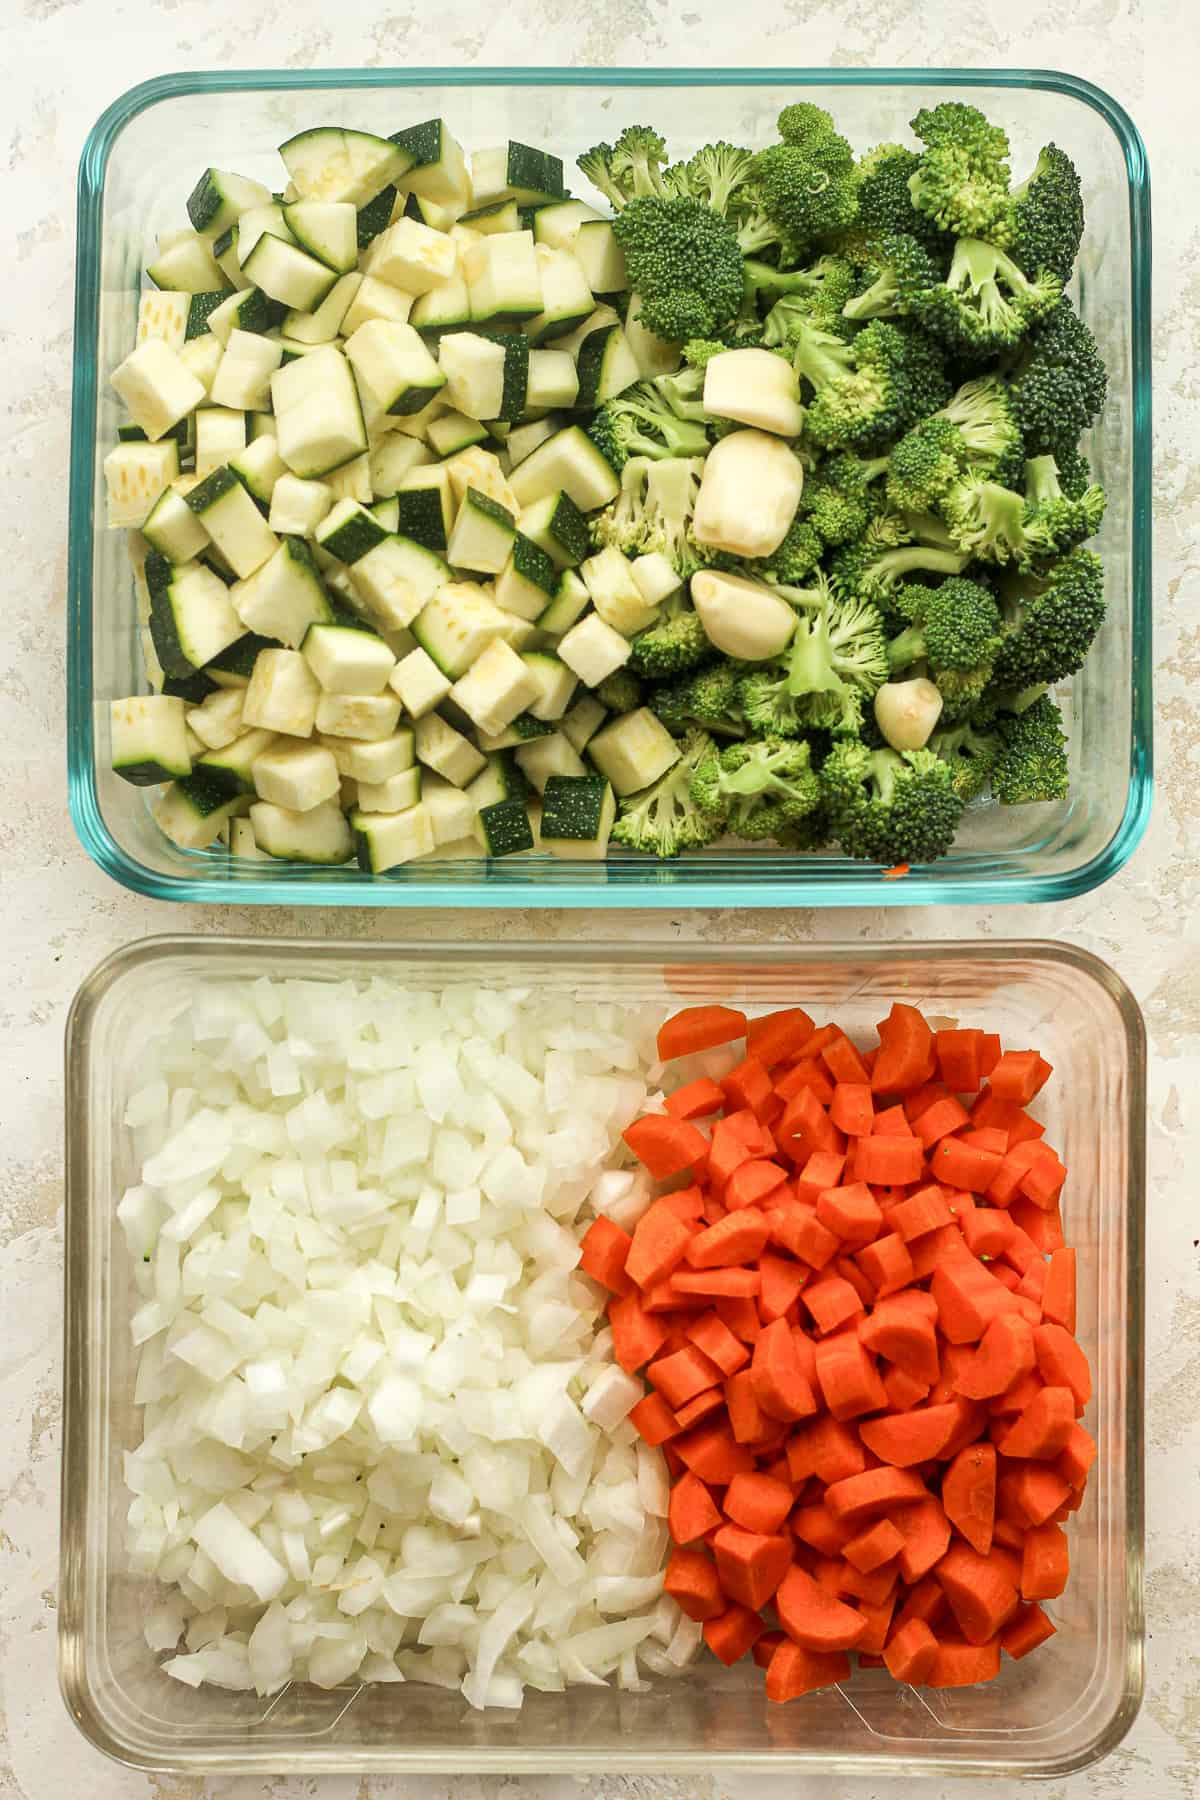 Two rectangular dishes with the chopped veggies.